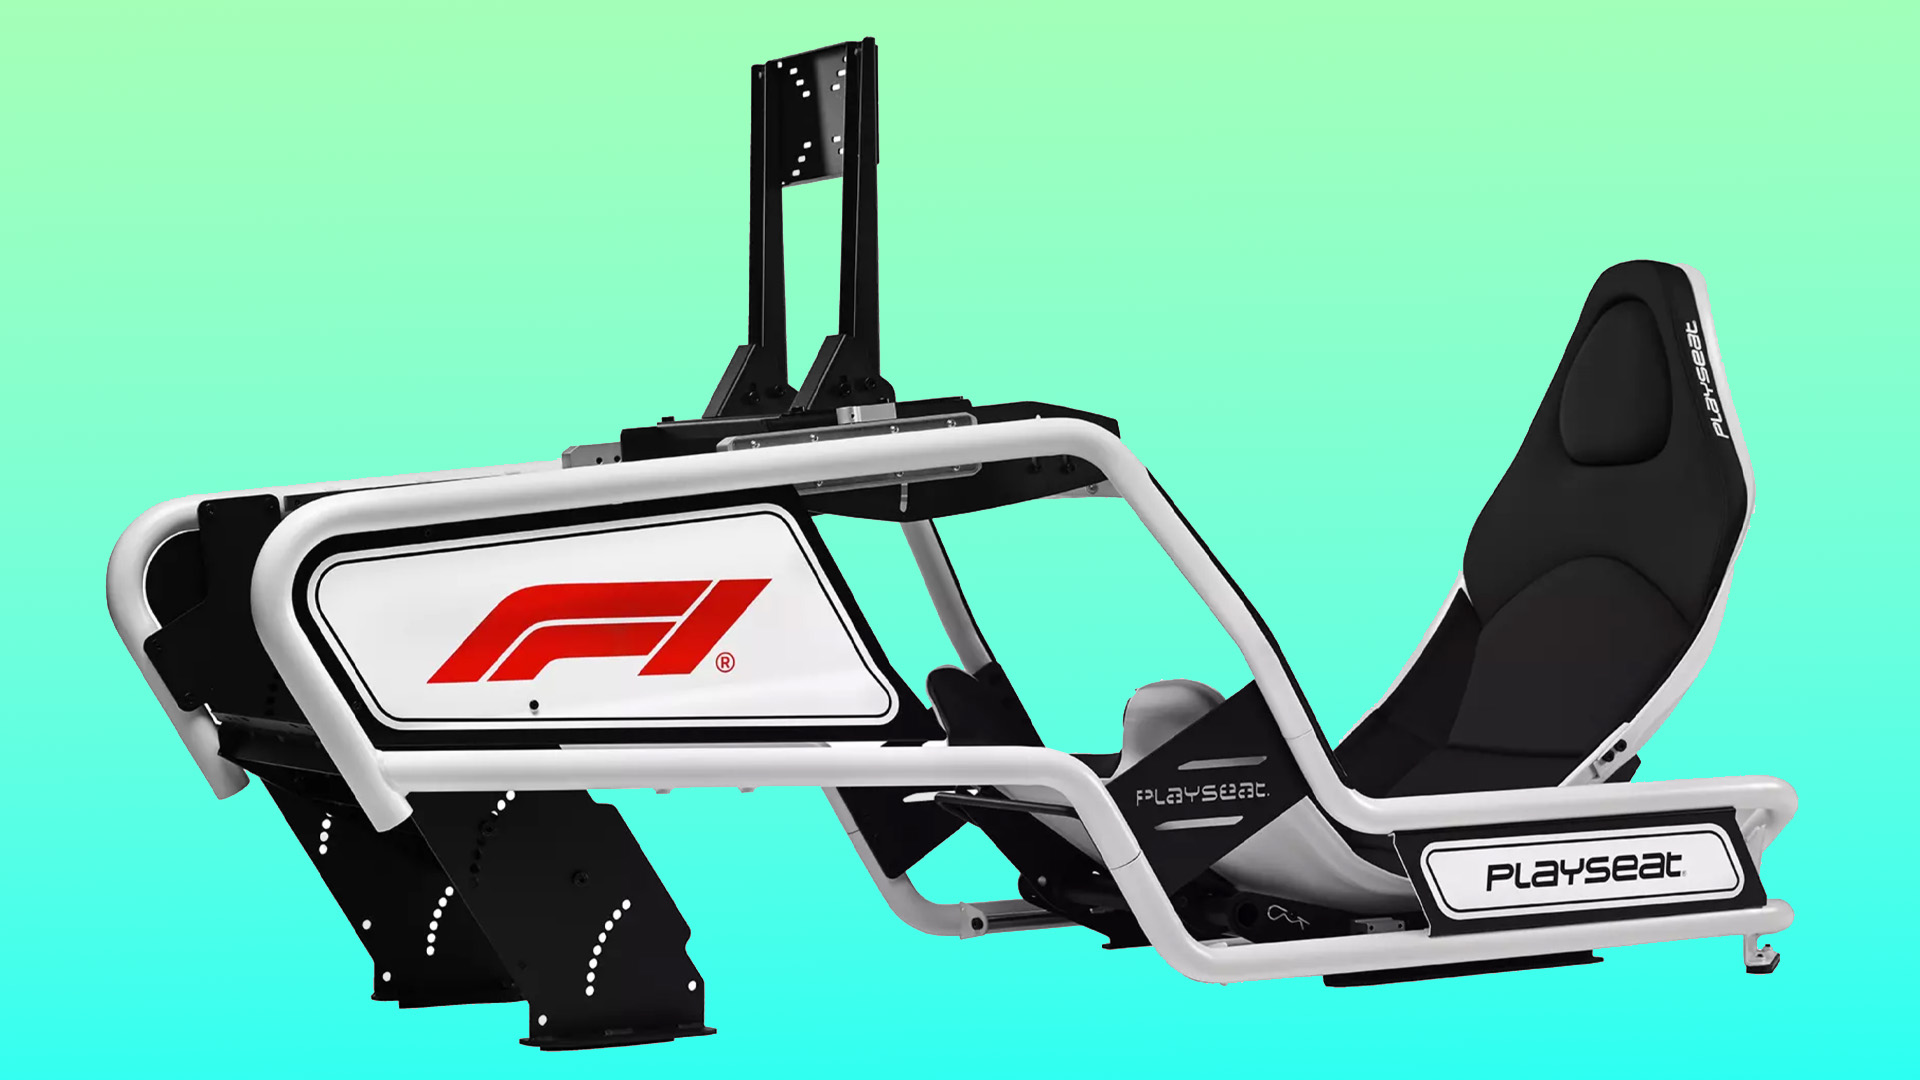  Playseat's latest racing seat makes it crystal clear that you like F1, in case a cockpit in your room wasn't clear enough 